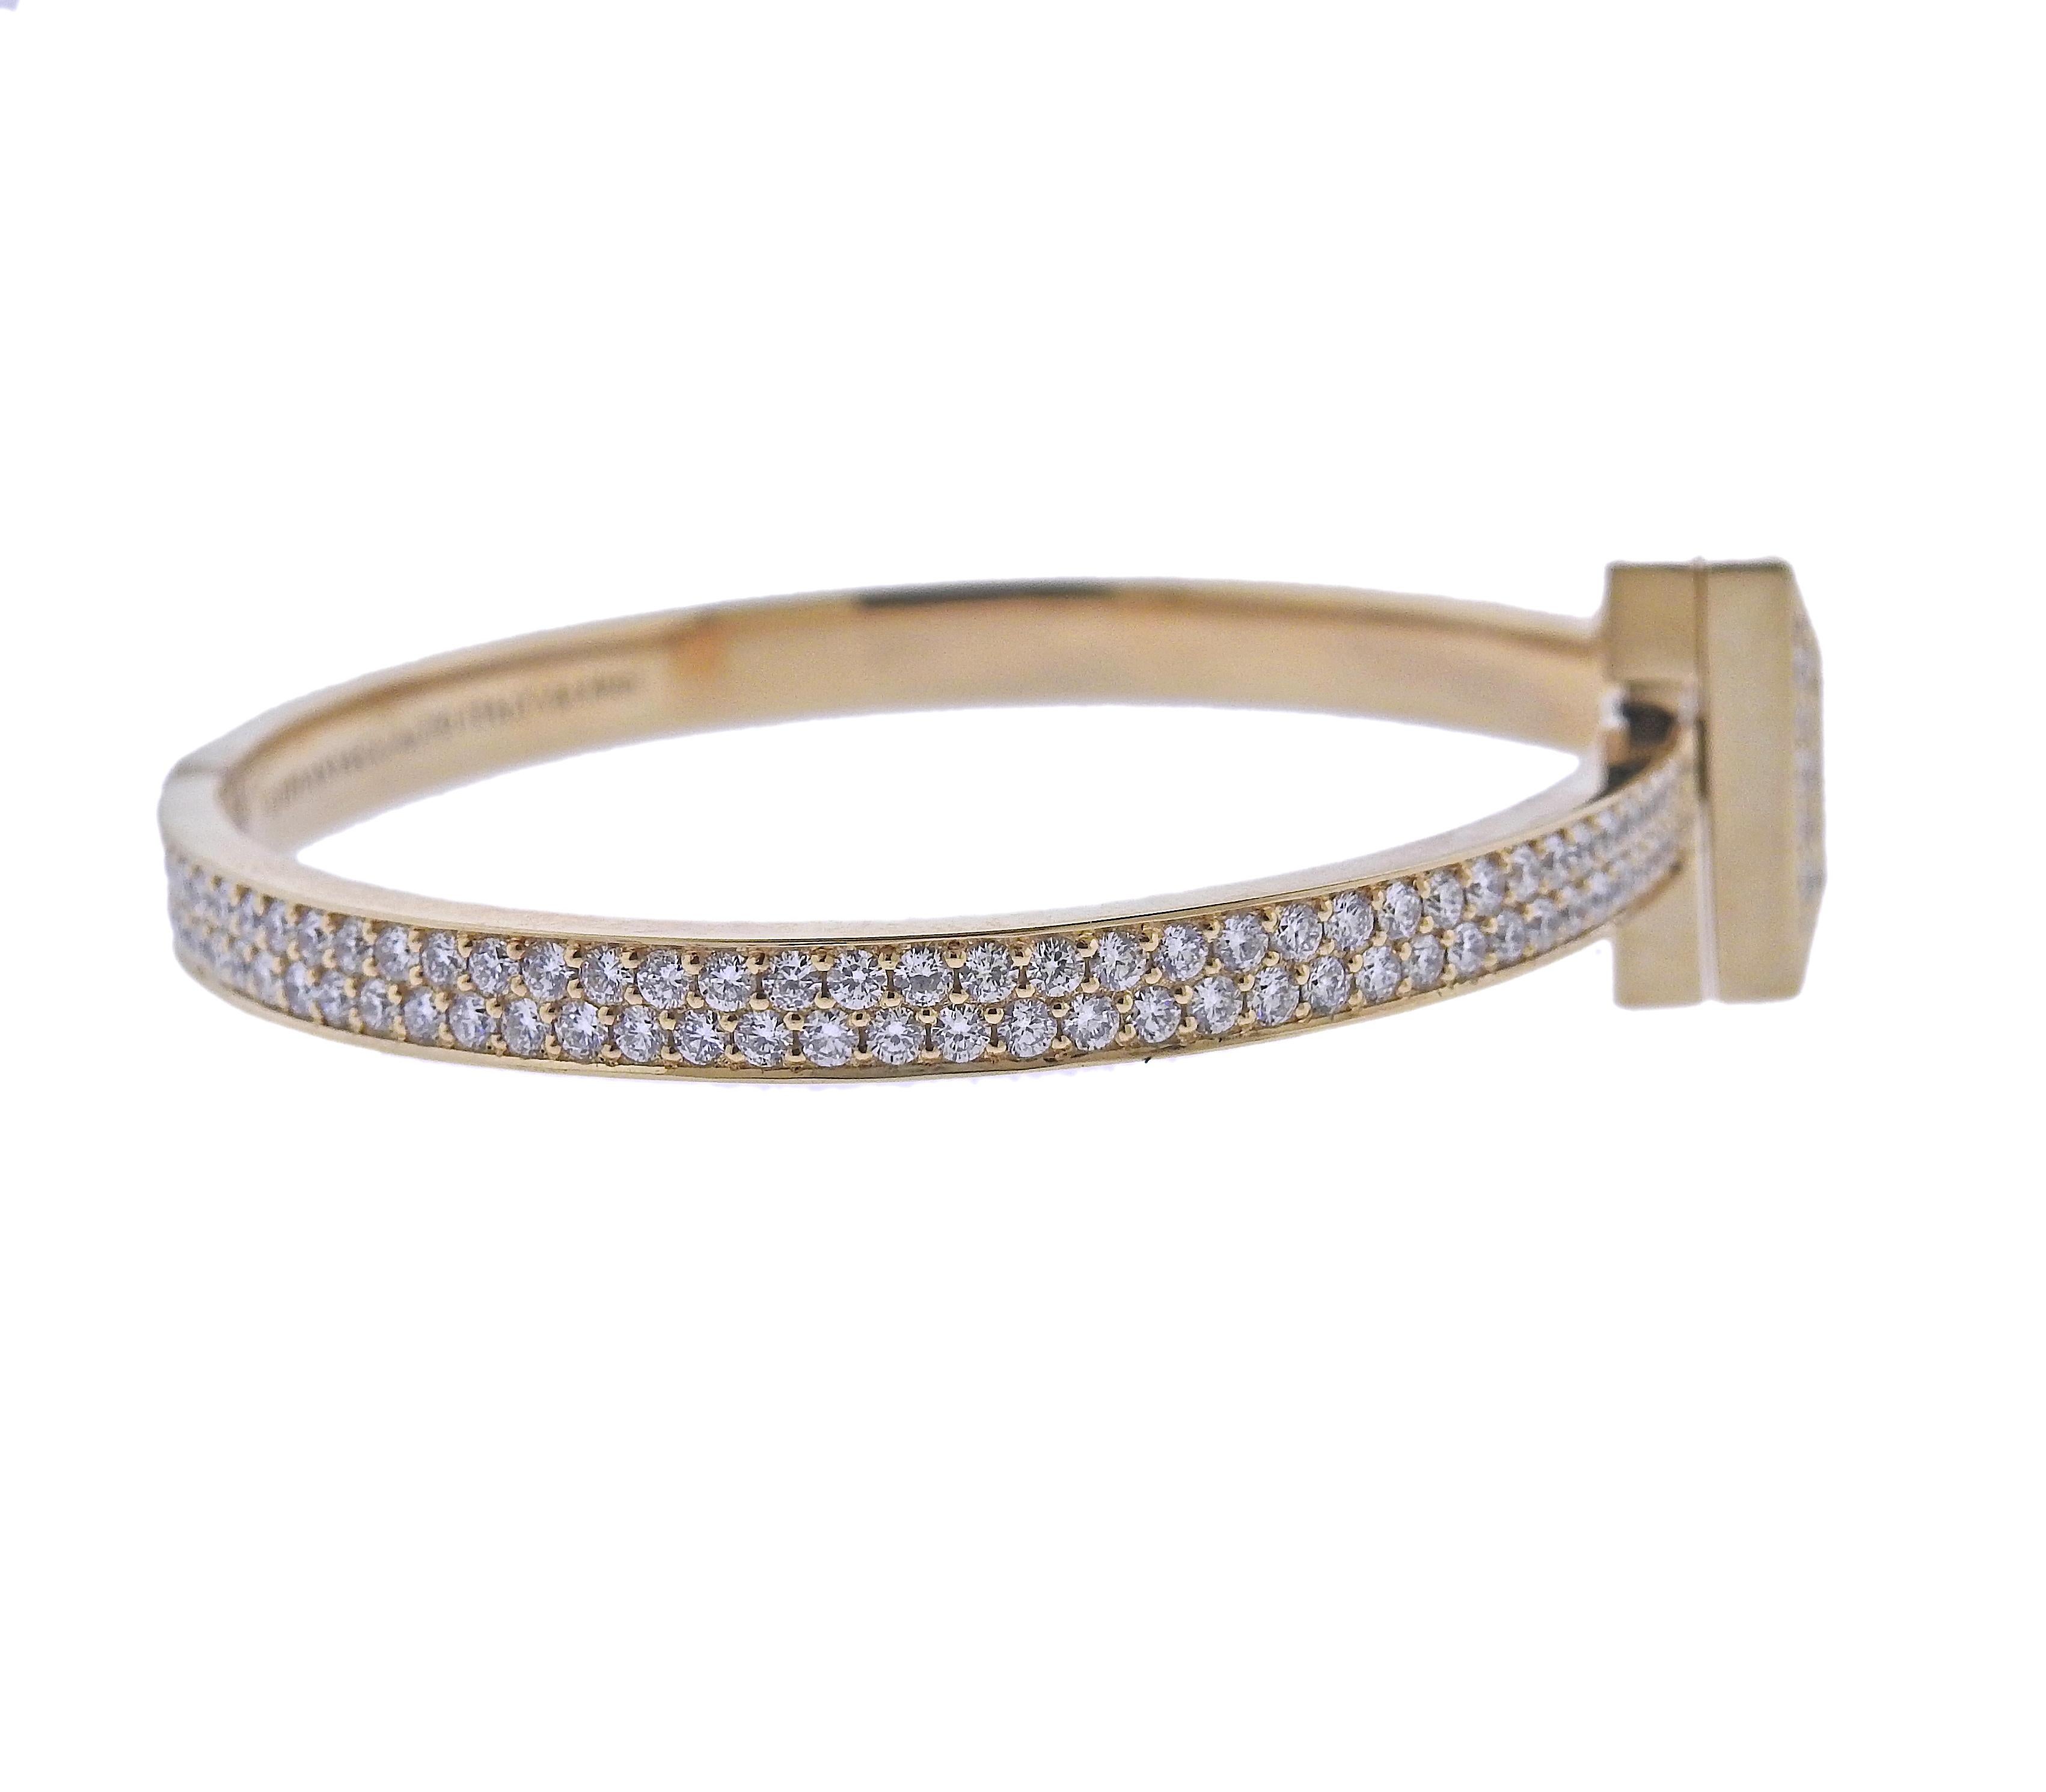 Tiffany & Co 18k yellow gold T1 bracelet, with 4.89ctw in G/VS diamonds. Retail $30,000. Bracelet will fit approx. 7